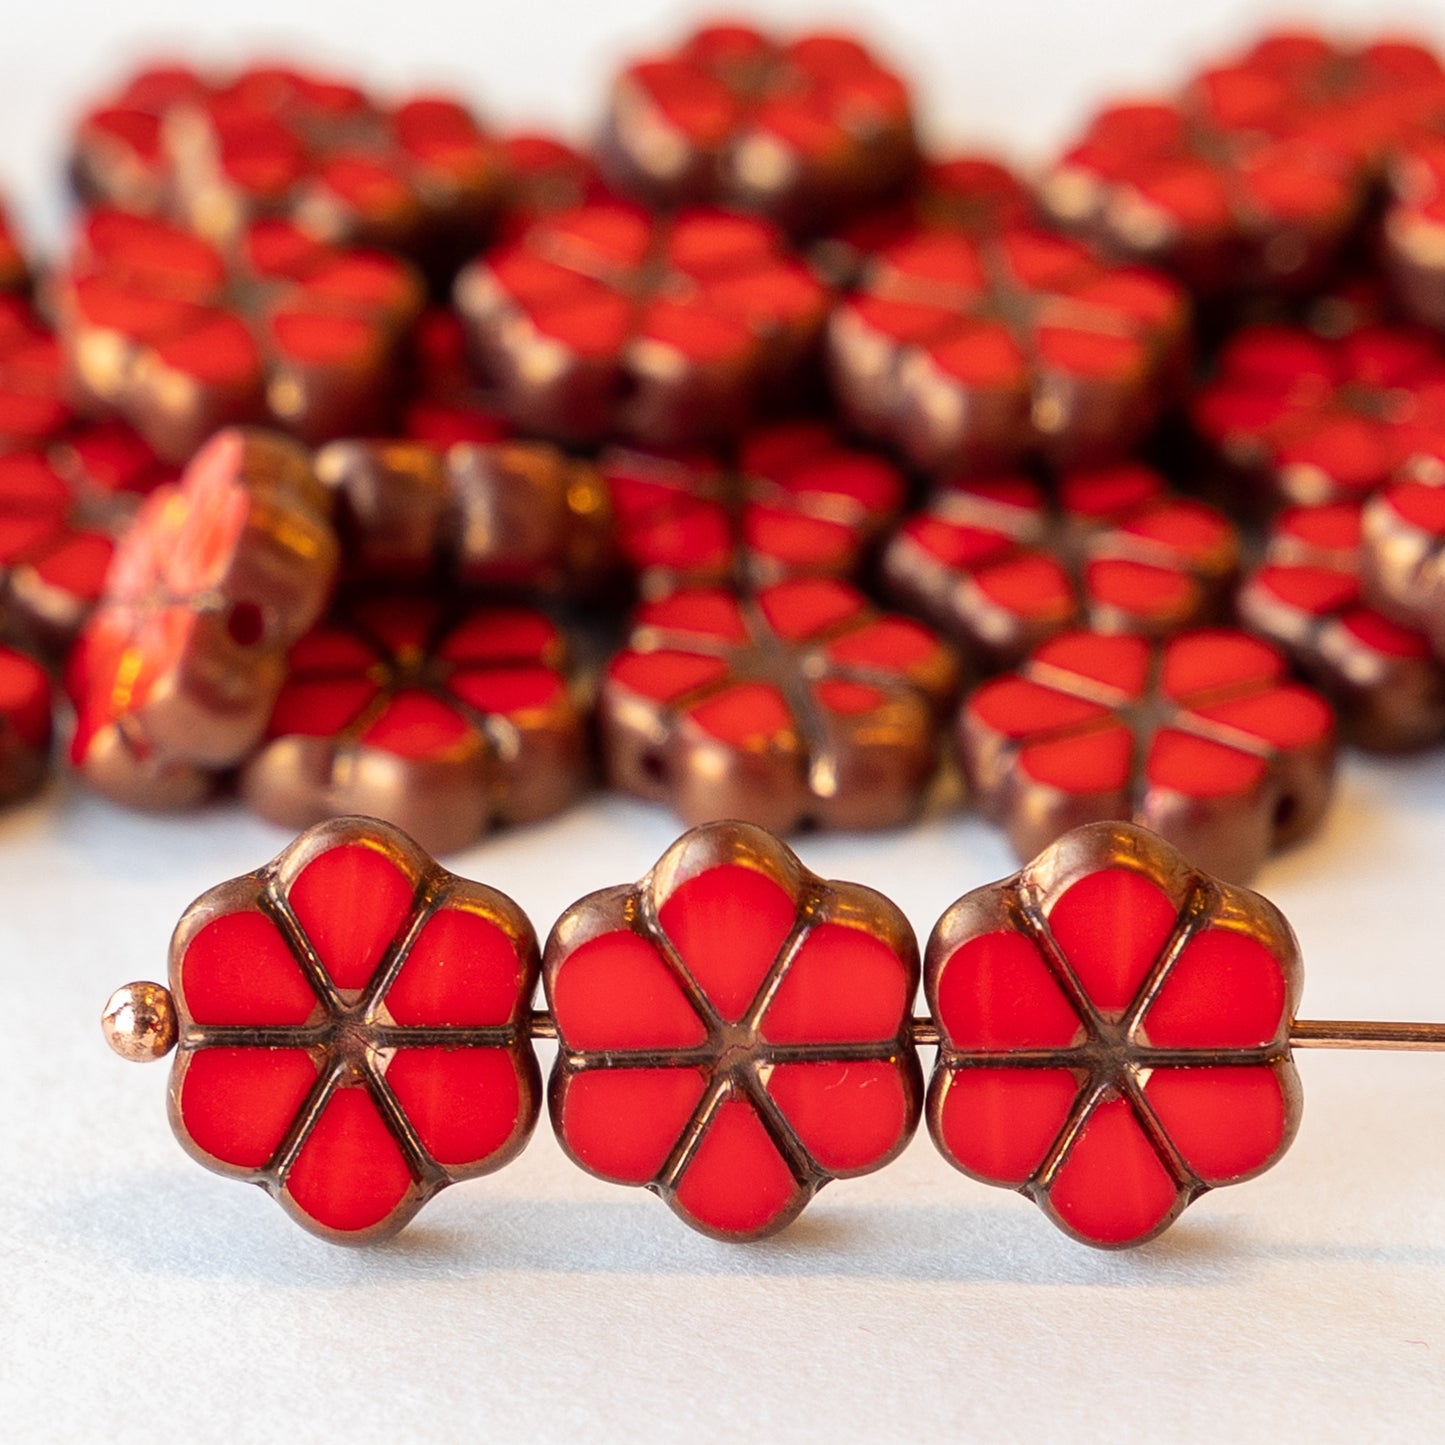 Load image into Gallery viewer, 10mm Forget Me Not Flower Beads - Opaque Red with Bronze Wash - 10 Beads
